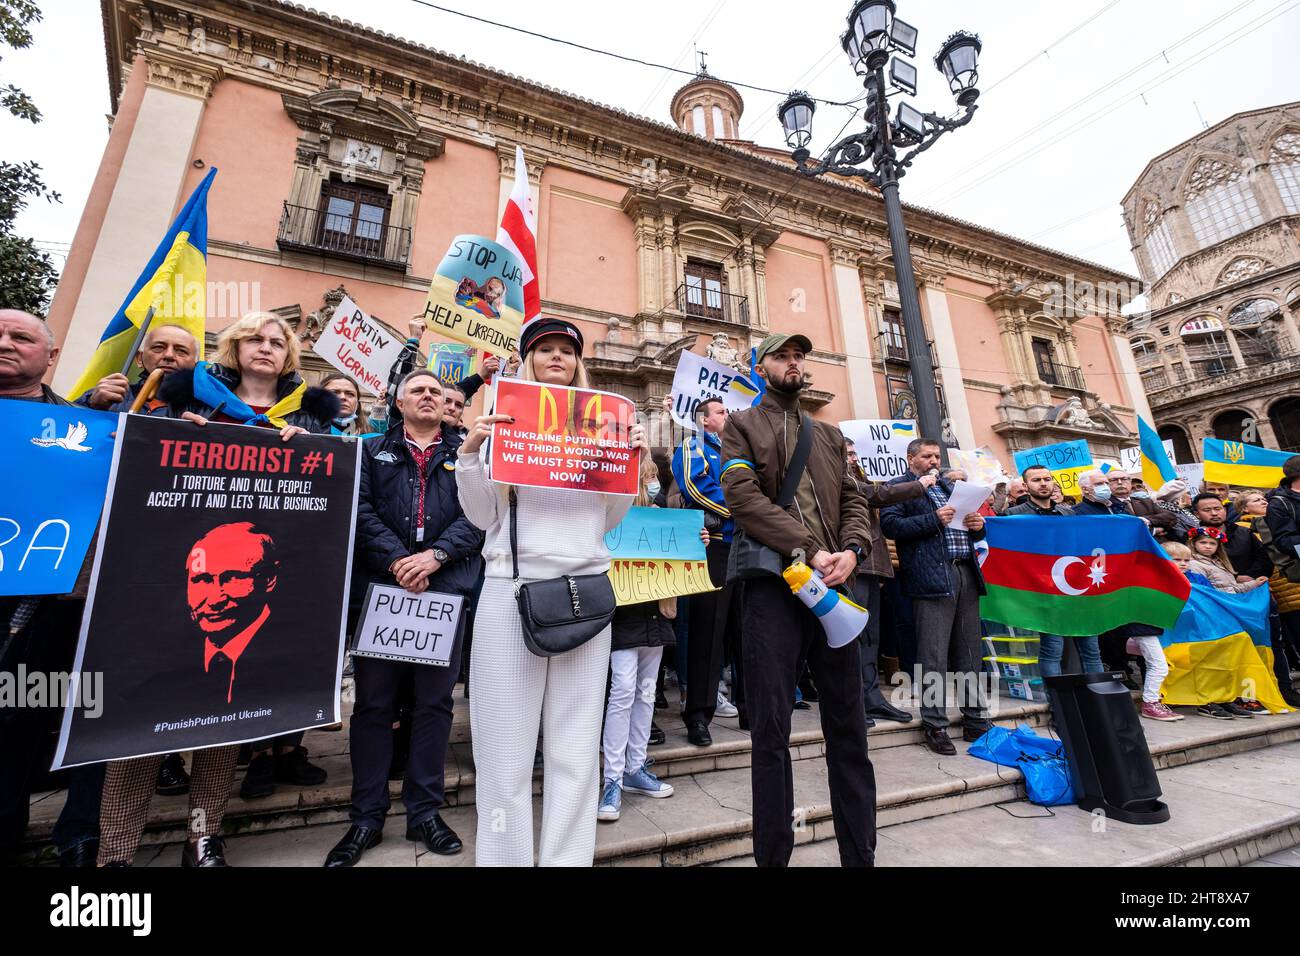 Valencia, Spain; 27th Feb 2022: Demonstrators protest against the war during a demonstration against Russia's invasion of Ukraine. Credit: Media+Media/Alamy Live News Stock Photo